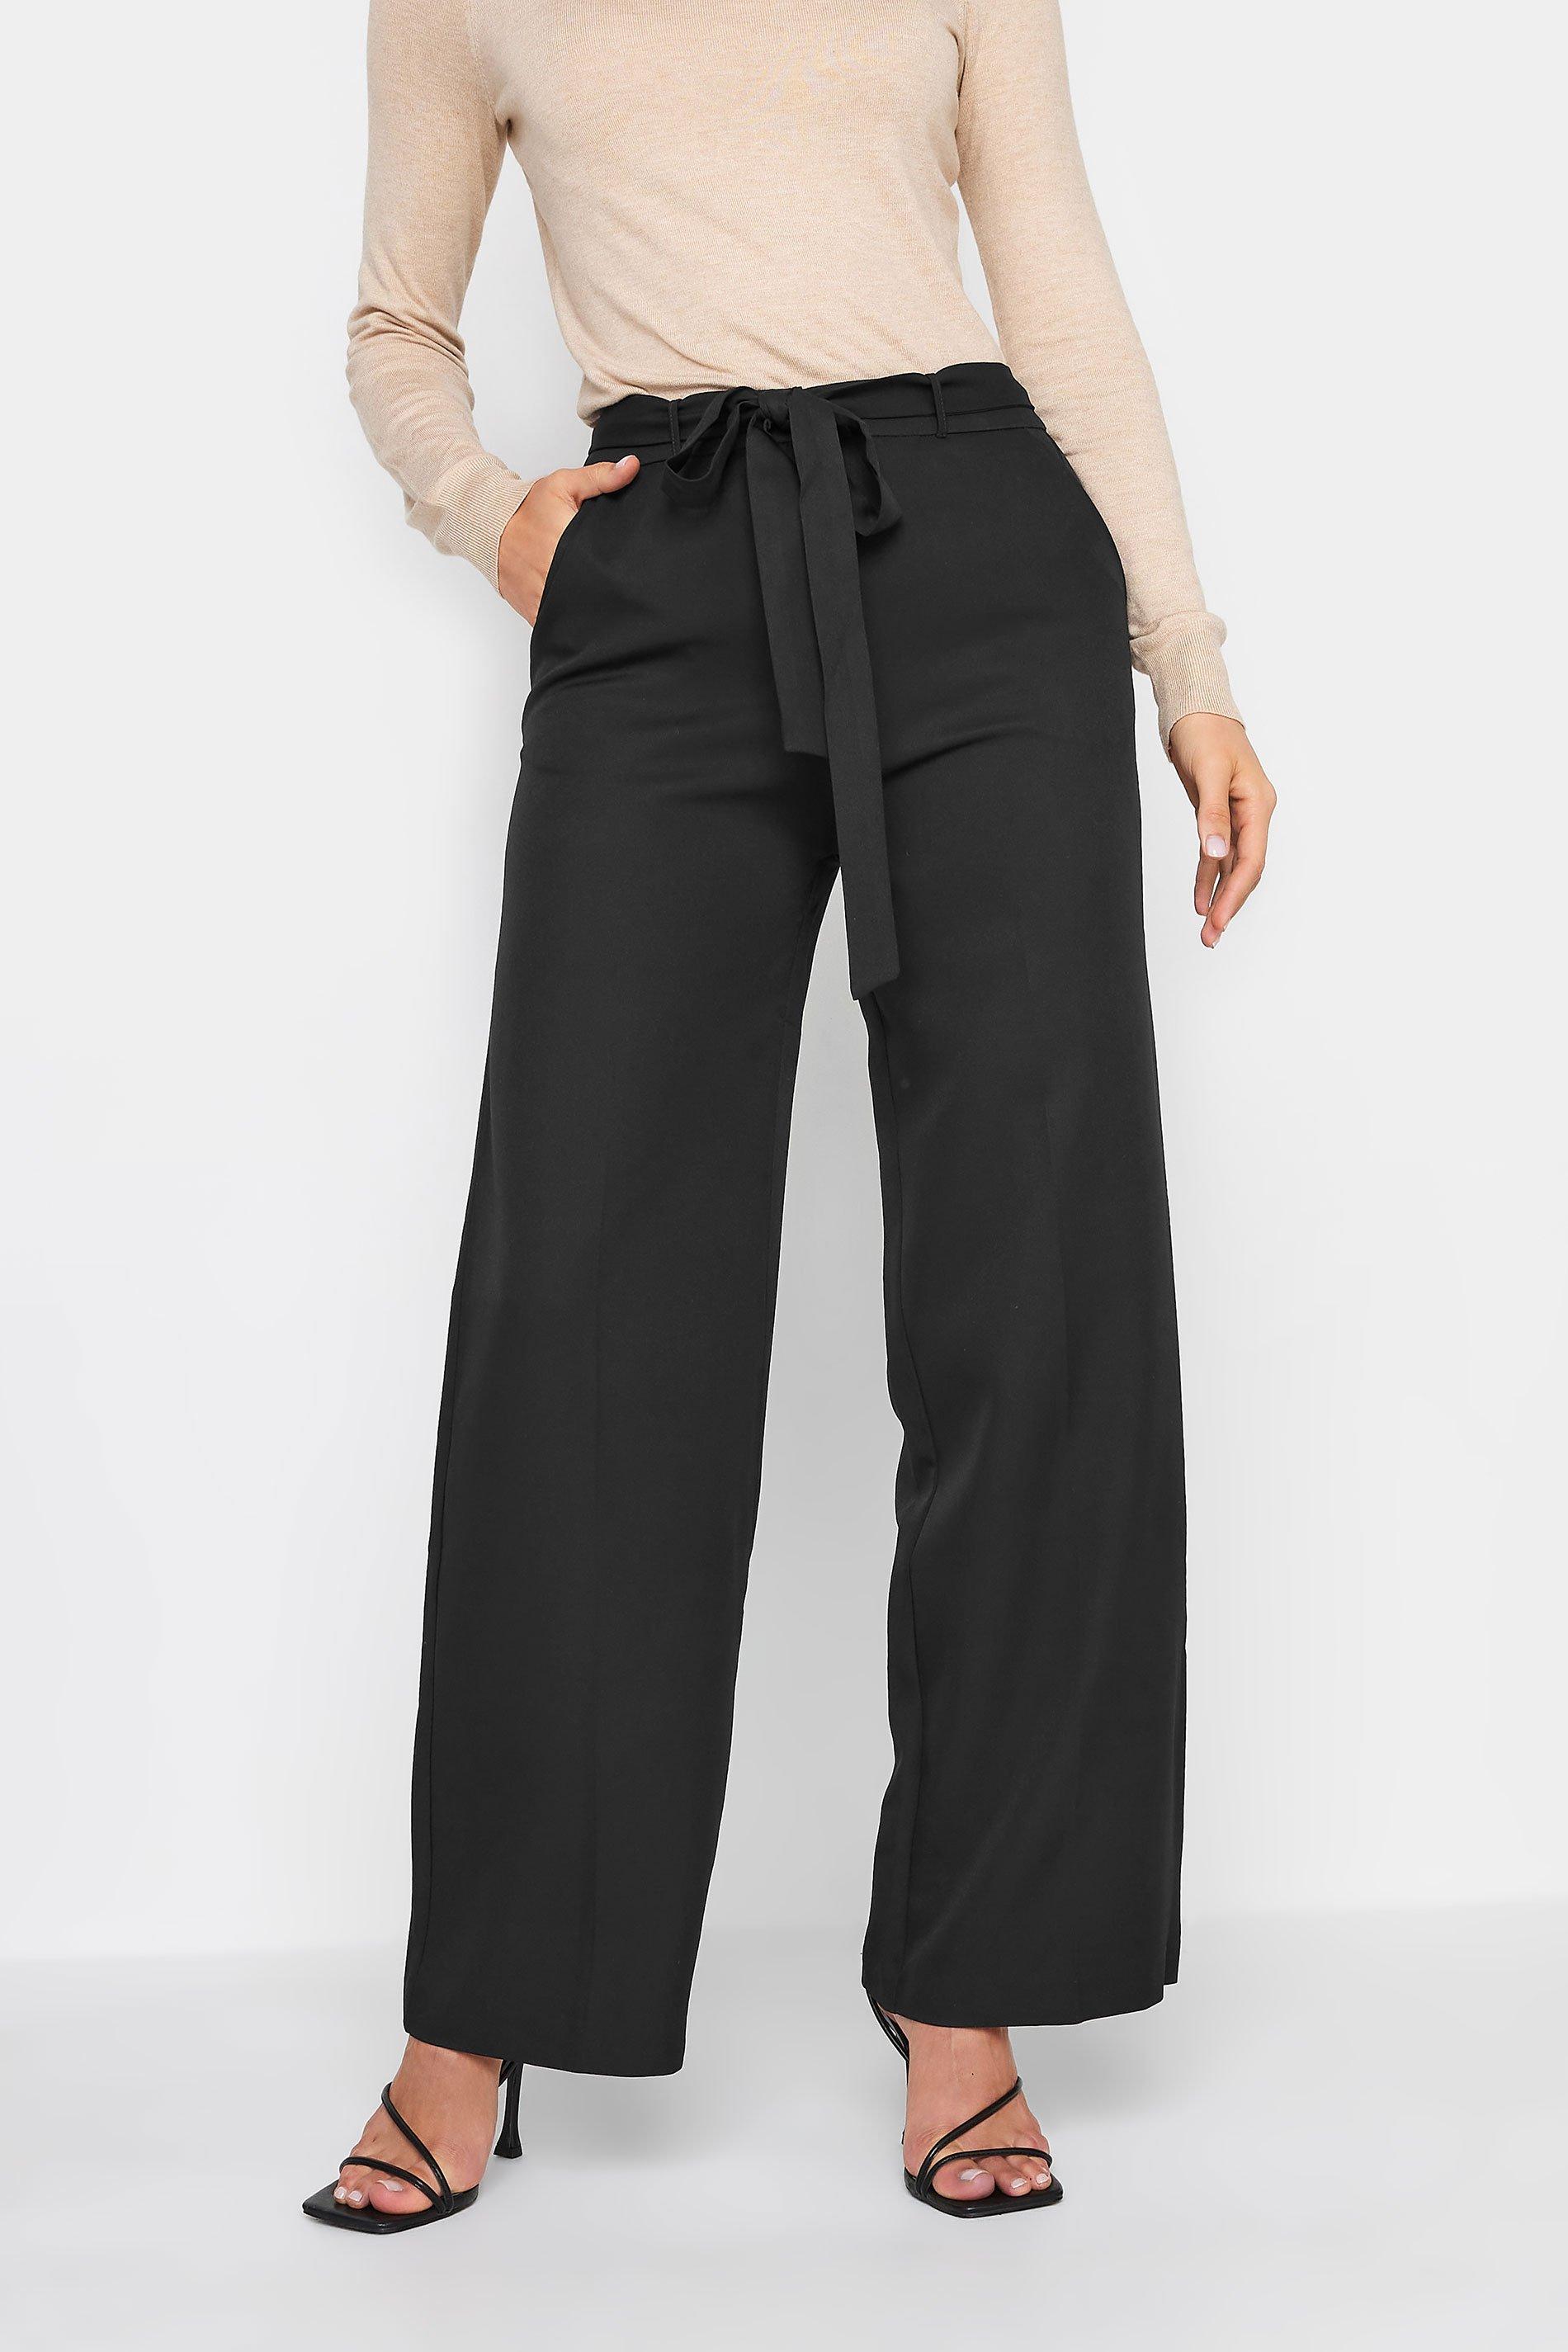 The Perfect Pant, Wide Leg Dress Pant for Women | SPANX